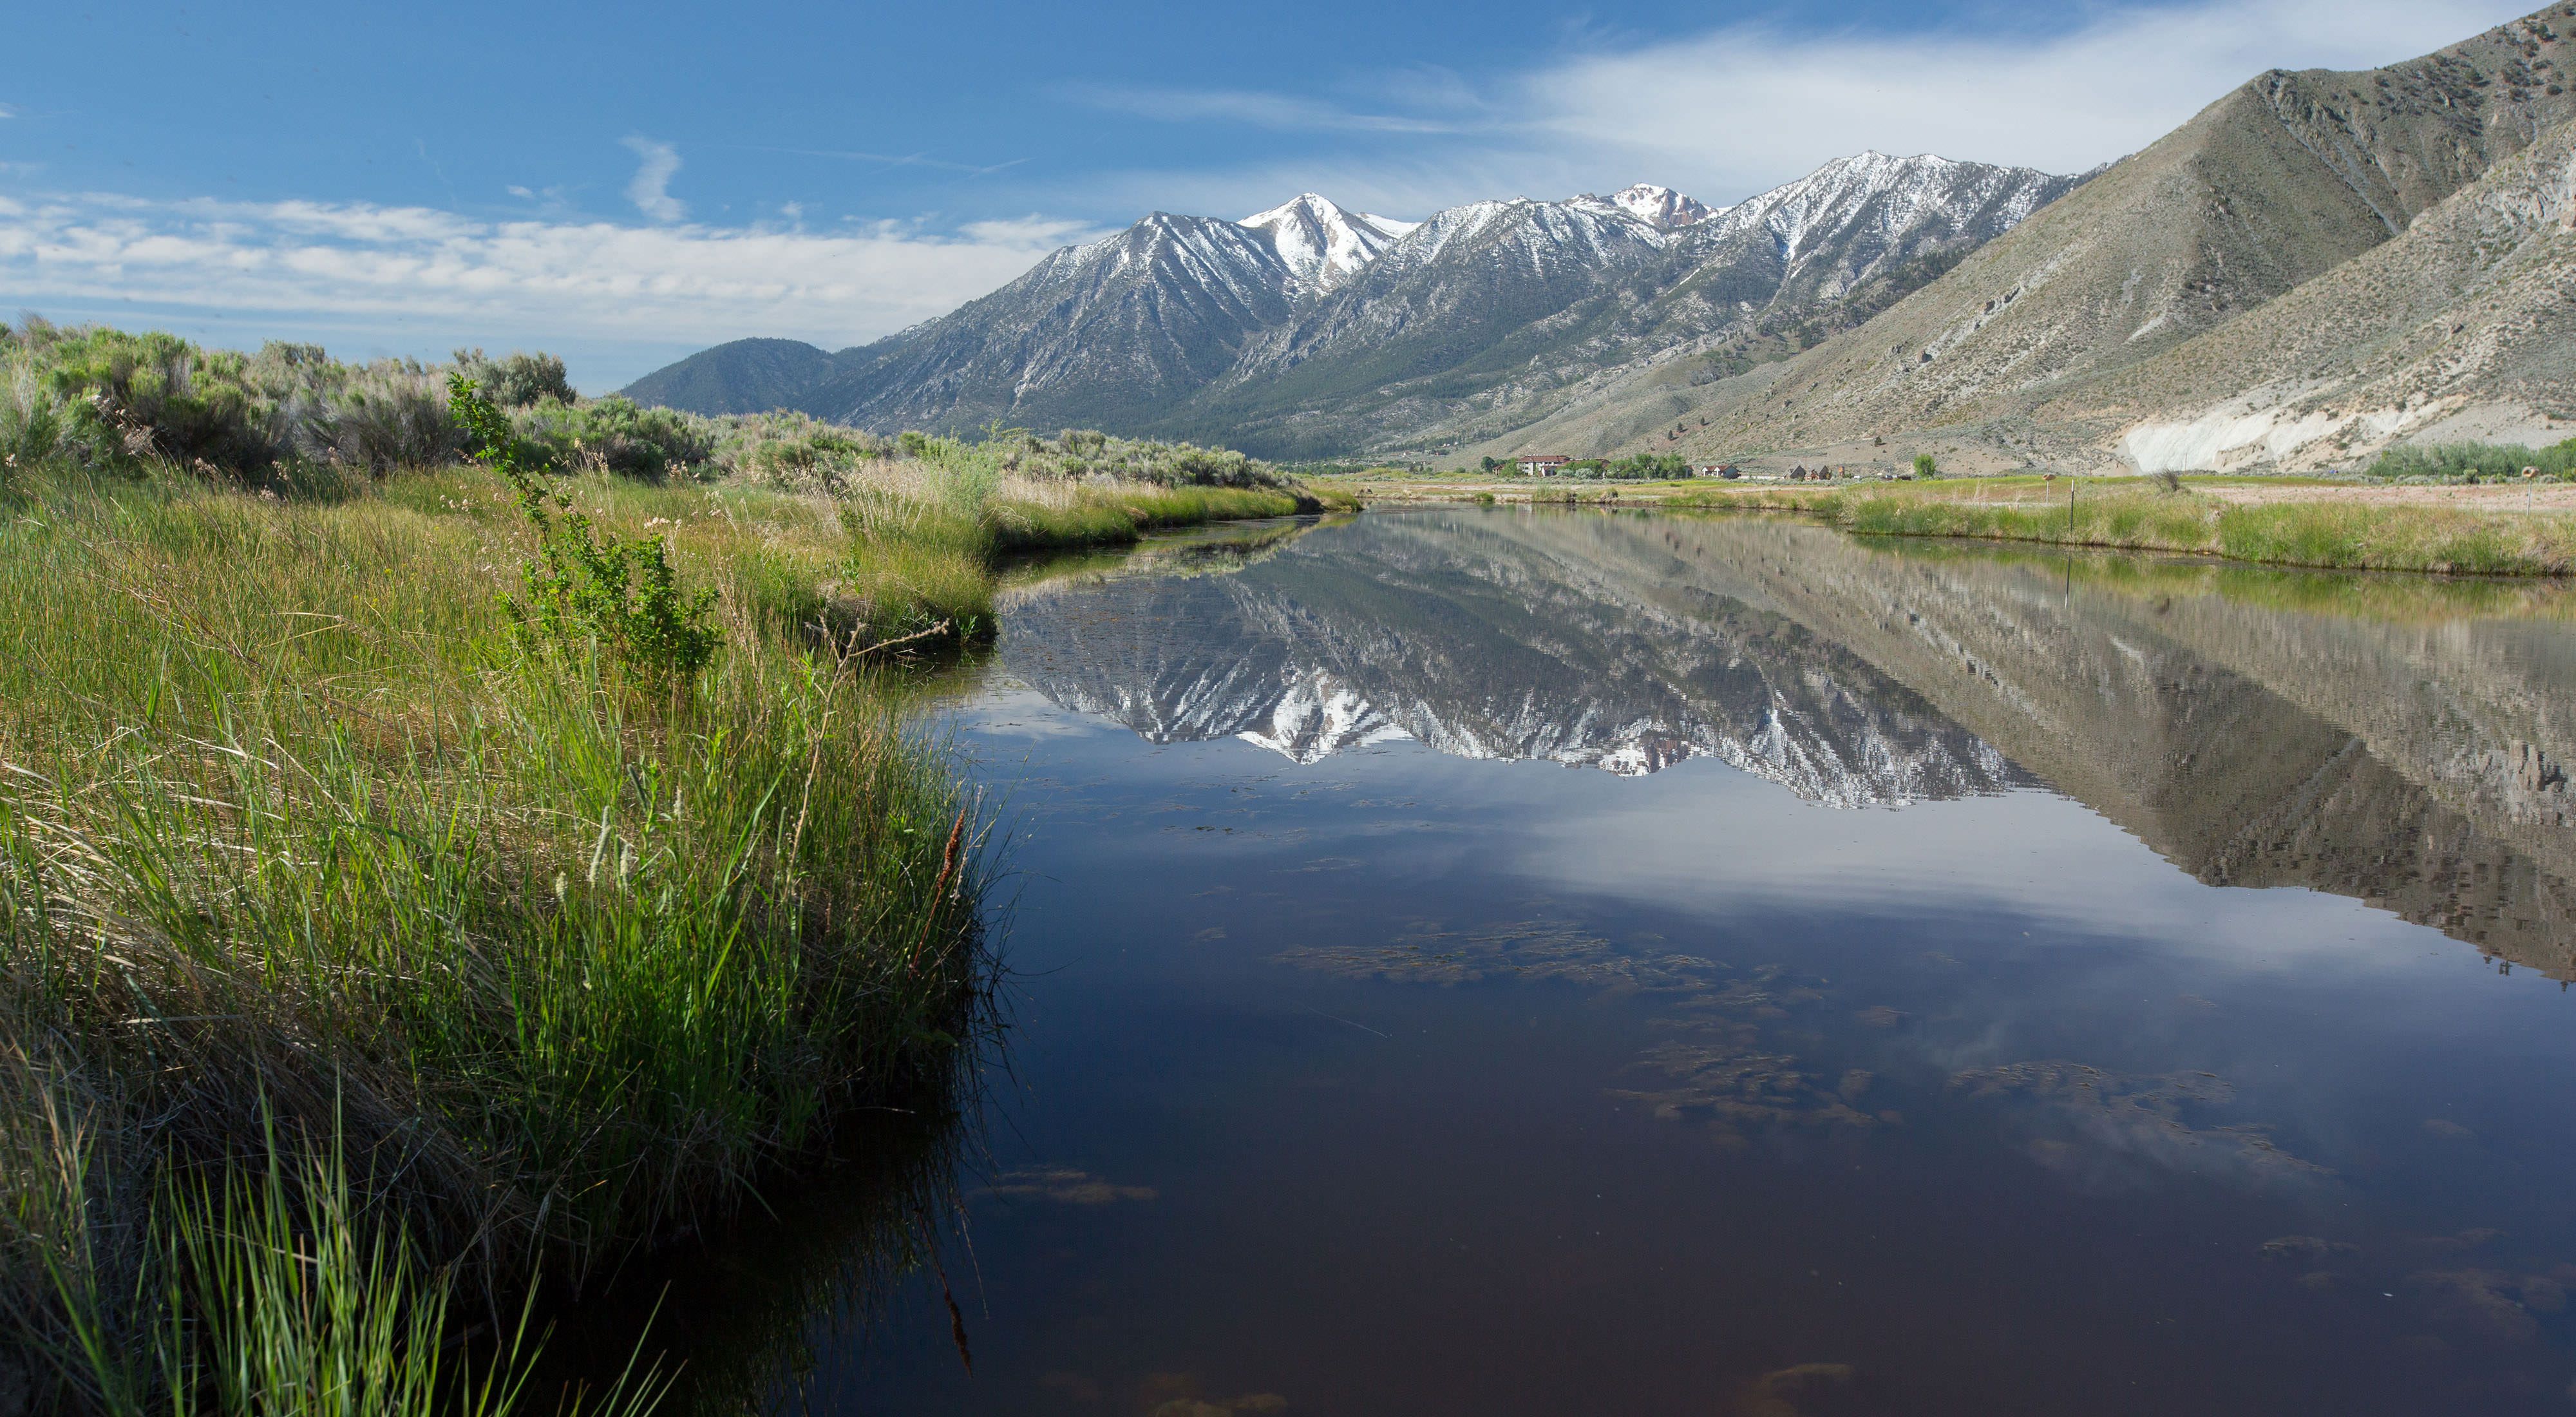 Snow-capped mountains reflected in the still water of the Carson River.